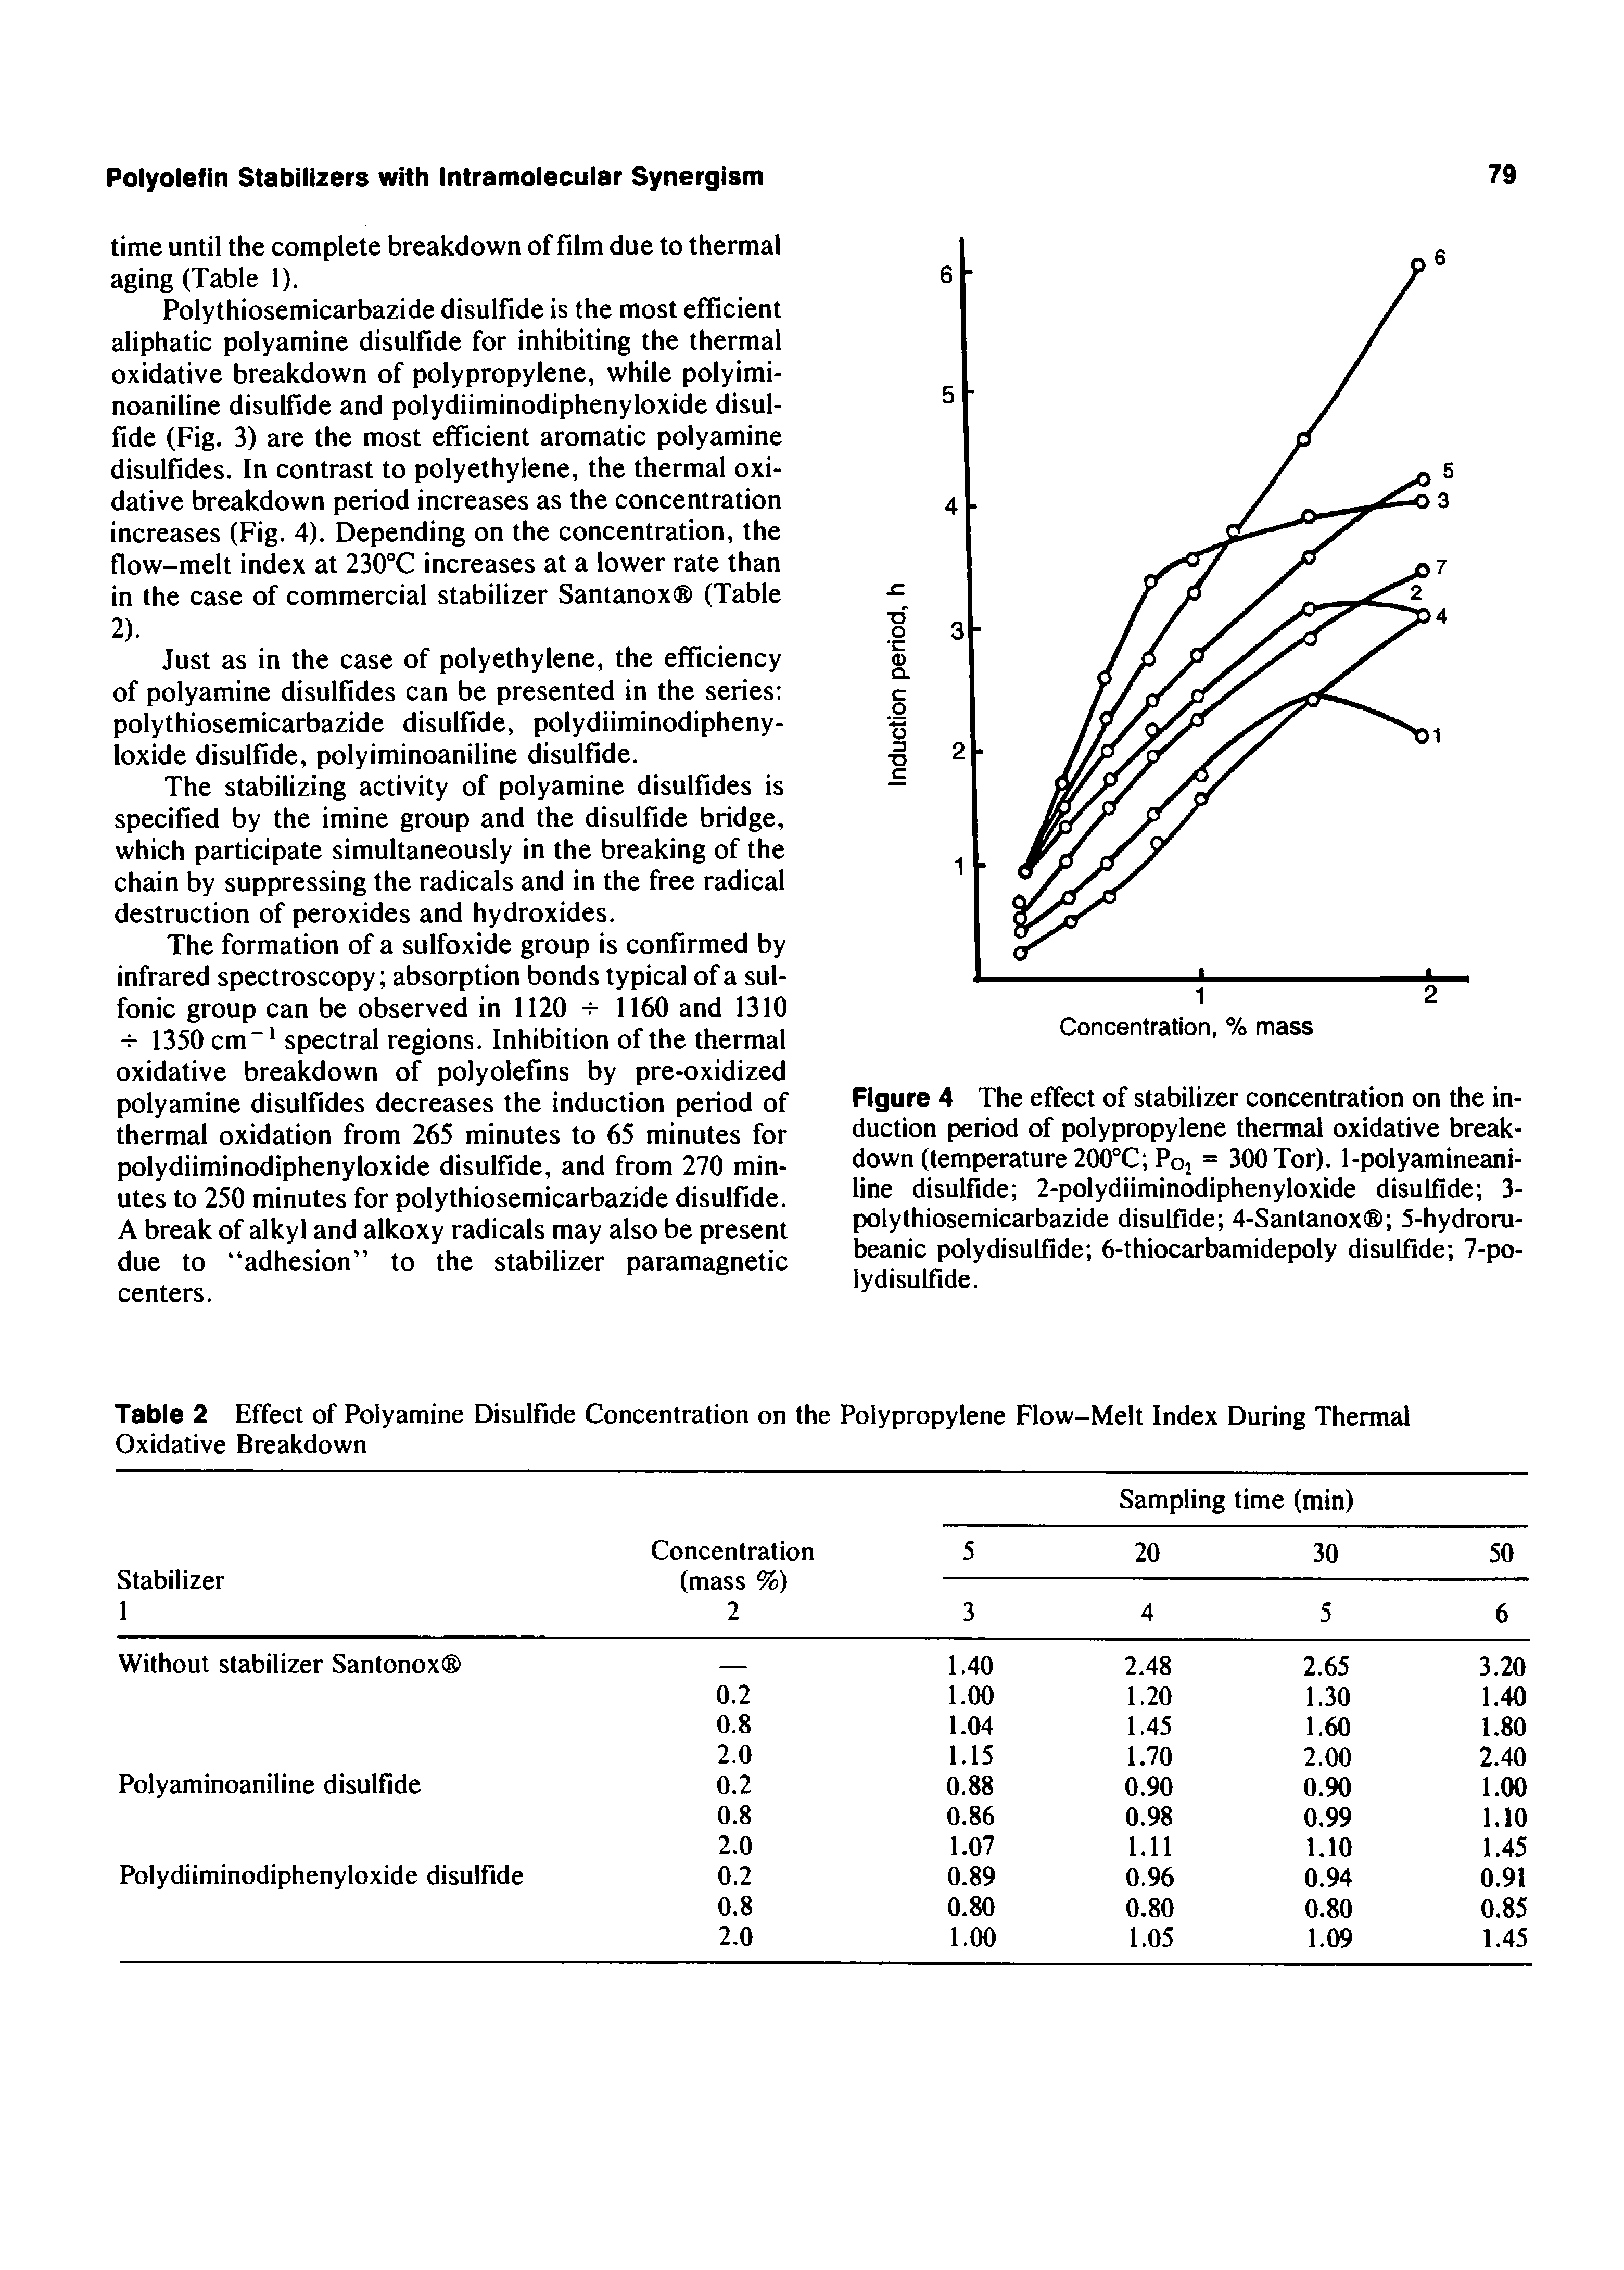 Figure 4 The effect of stabilizer concentration on the induction period of polypropylene thermal oxidative breakdown (temperature 200°C P02 = 300 Tor). 1-polyamineani-line disulfide 2-polydiiminodiphenyloxide disulfide 3-polythiosemicarbazide disulfide 4-Santanox 5-hydroru-beanic polydisulfide 6-thiocarbamidepoly disulfide 7-po-lydisulfide.